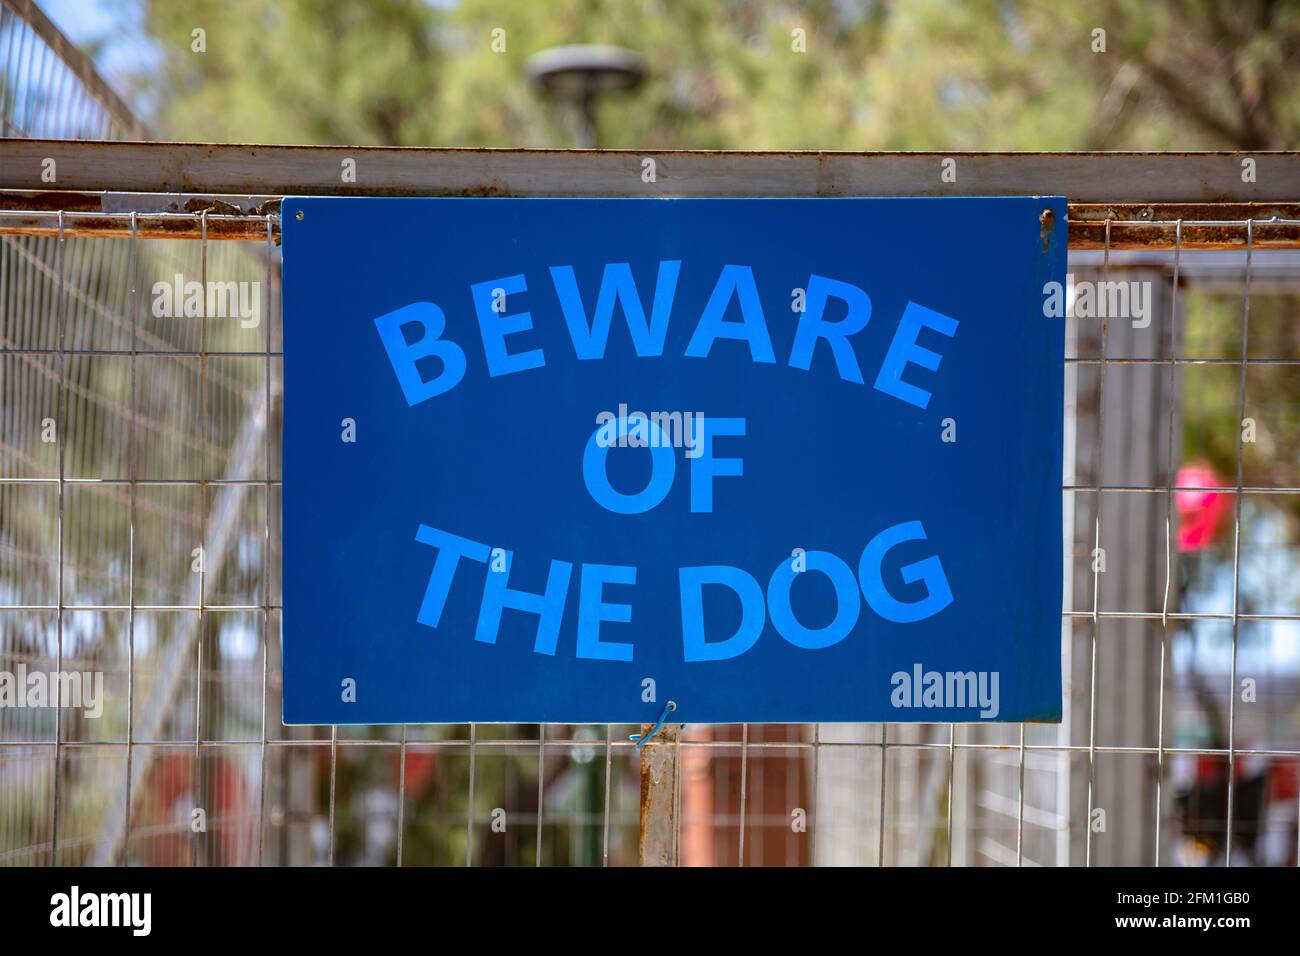 Beware of the dog, Warning messagel, text on blue sign. Label on metal rusty wire mesh fence background inform about caution, danger canine attack, at Stock Photo